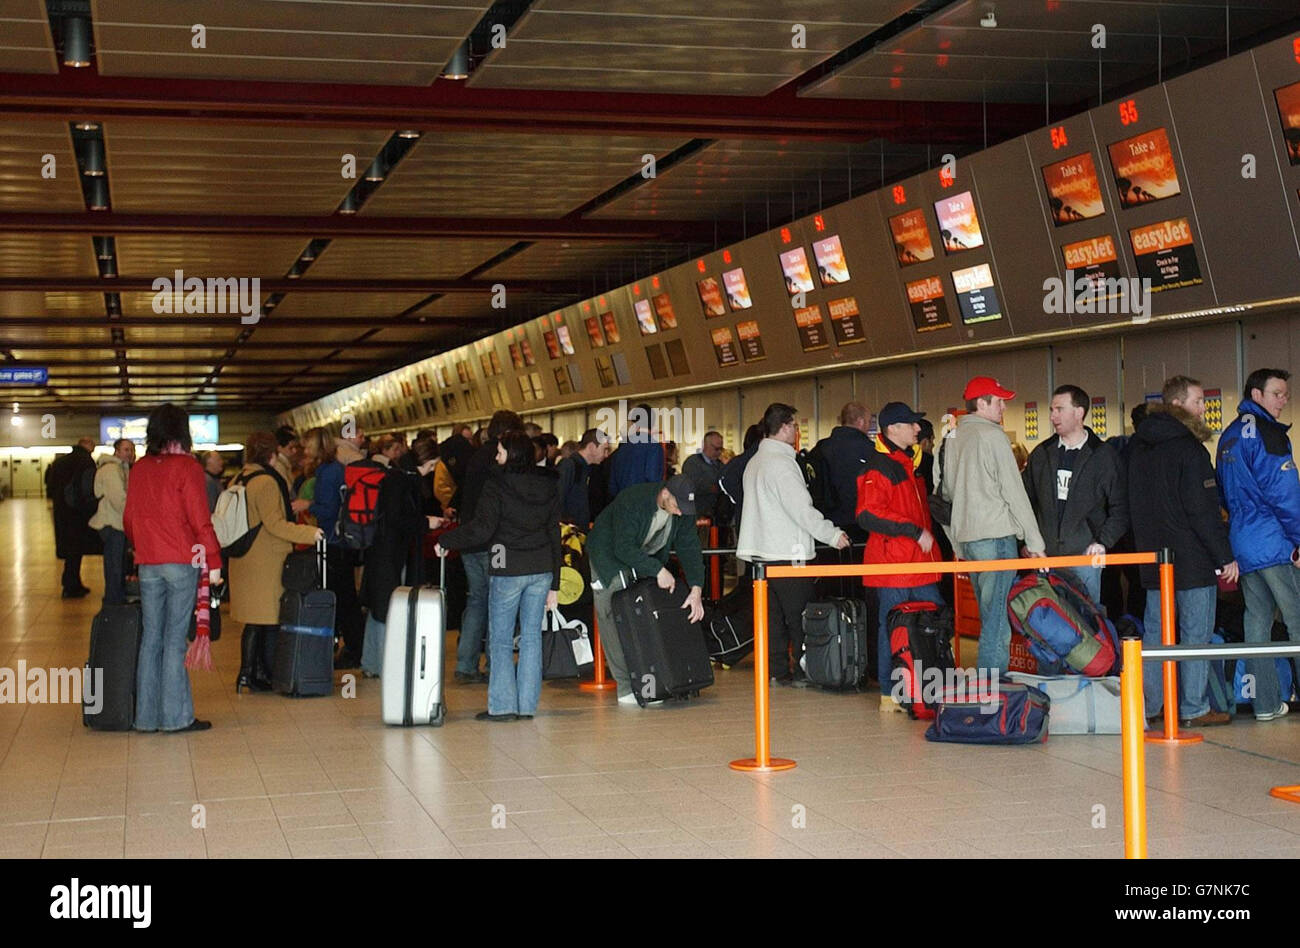 Passengers in the check-in area. Low-fare airline Ryanair celebrated the start of services from Luton to Esjberg in Denmark, Stockholm, Pisa, Venice Treviso, Girona, and Nimes in France. Stock Photo